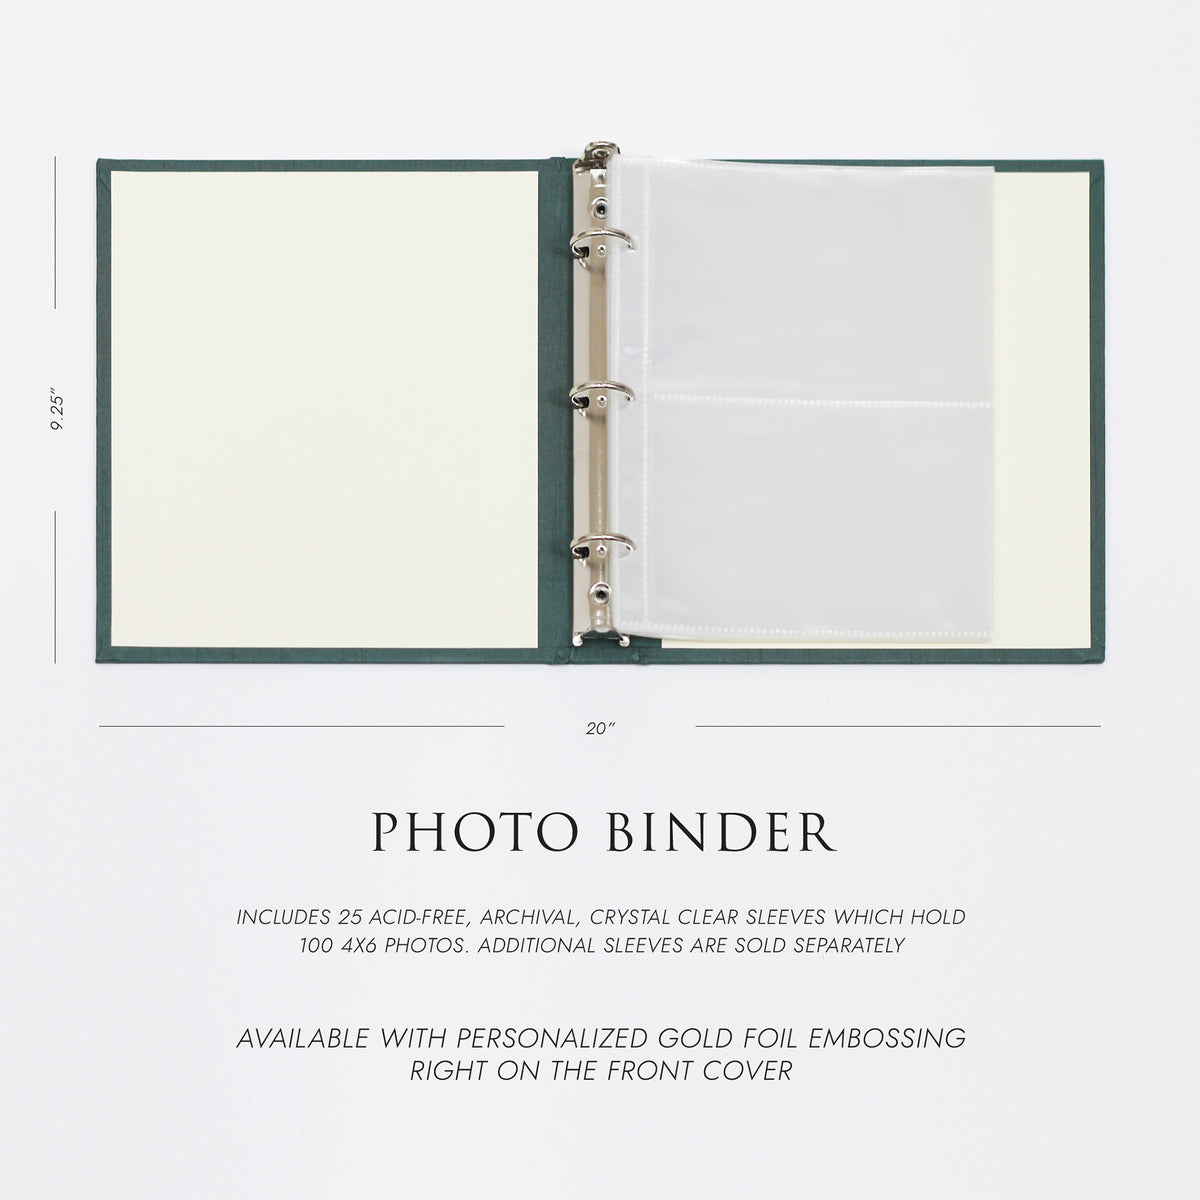 Medium Photo Binder For 4x6 Photos | Cover: Champagne Silk | Available Personalized